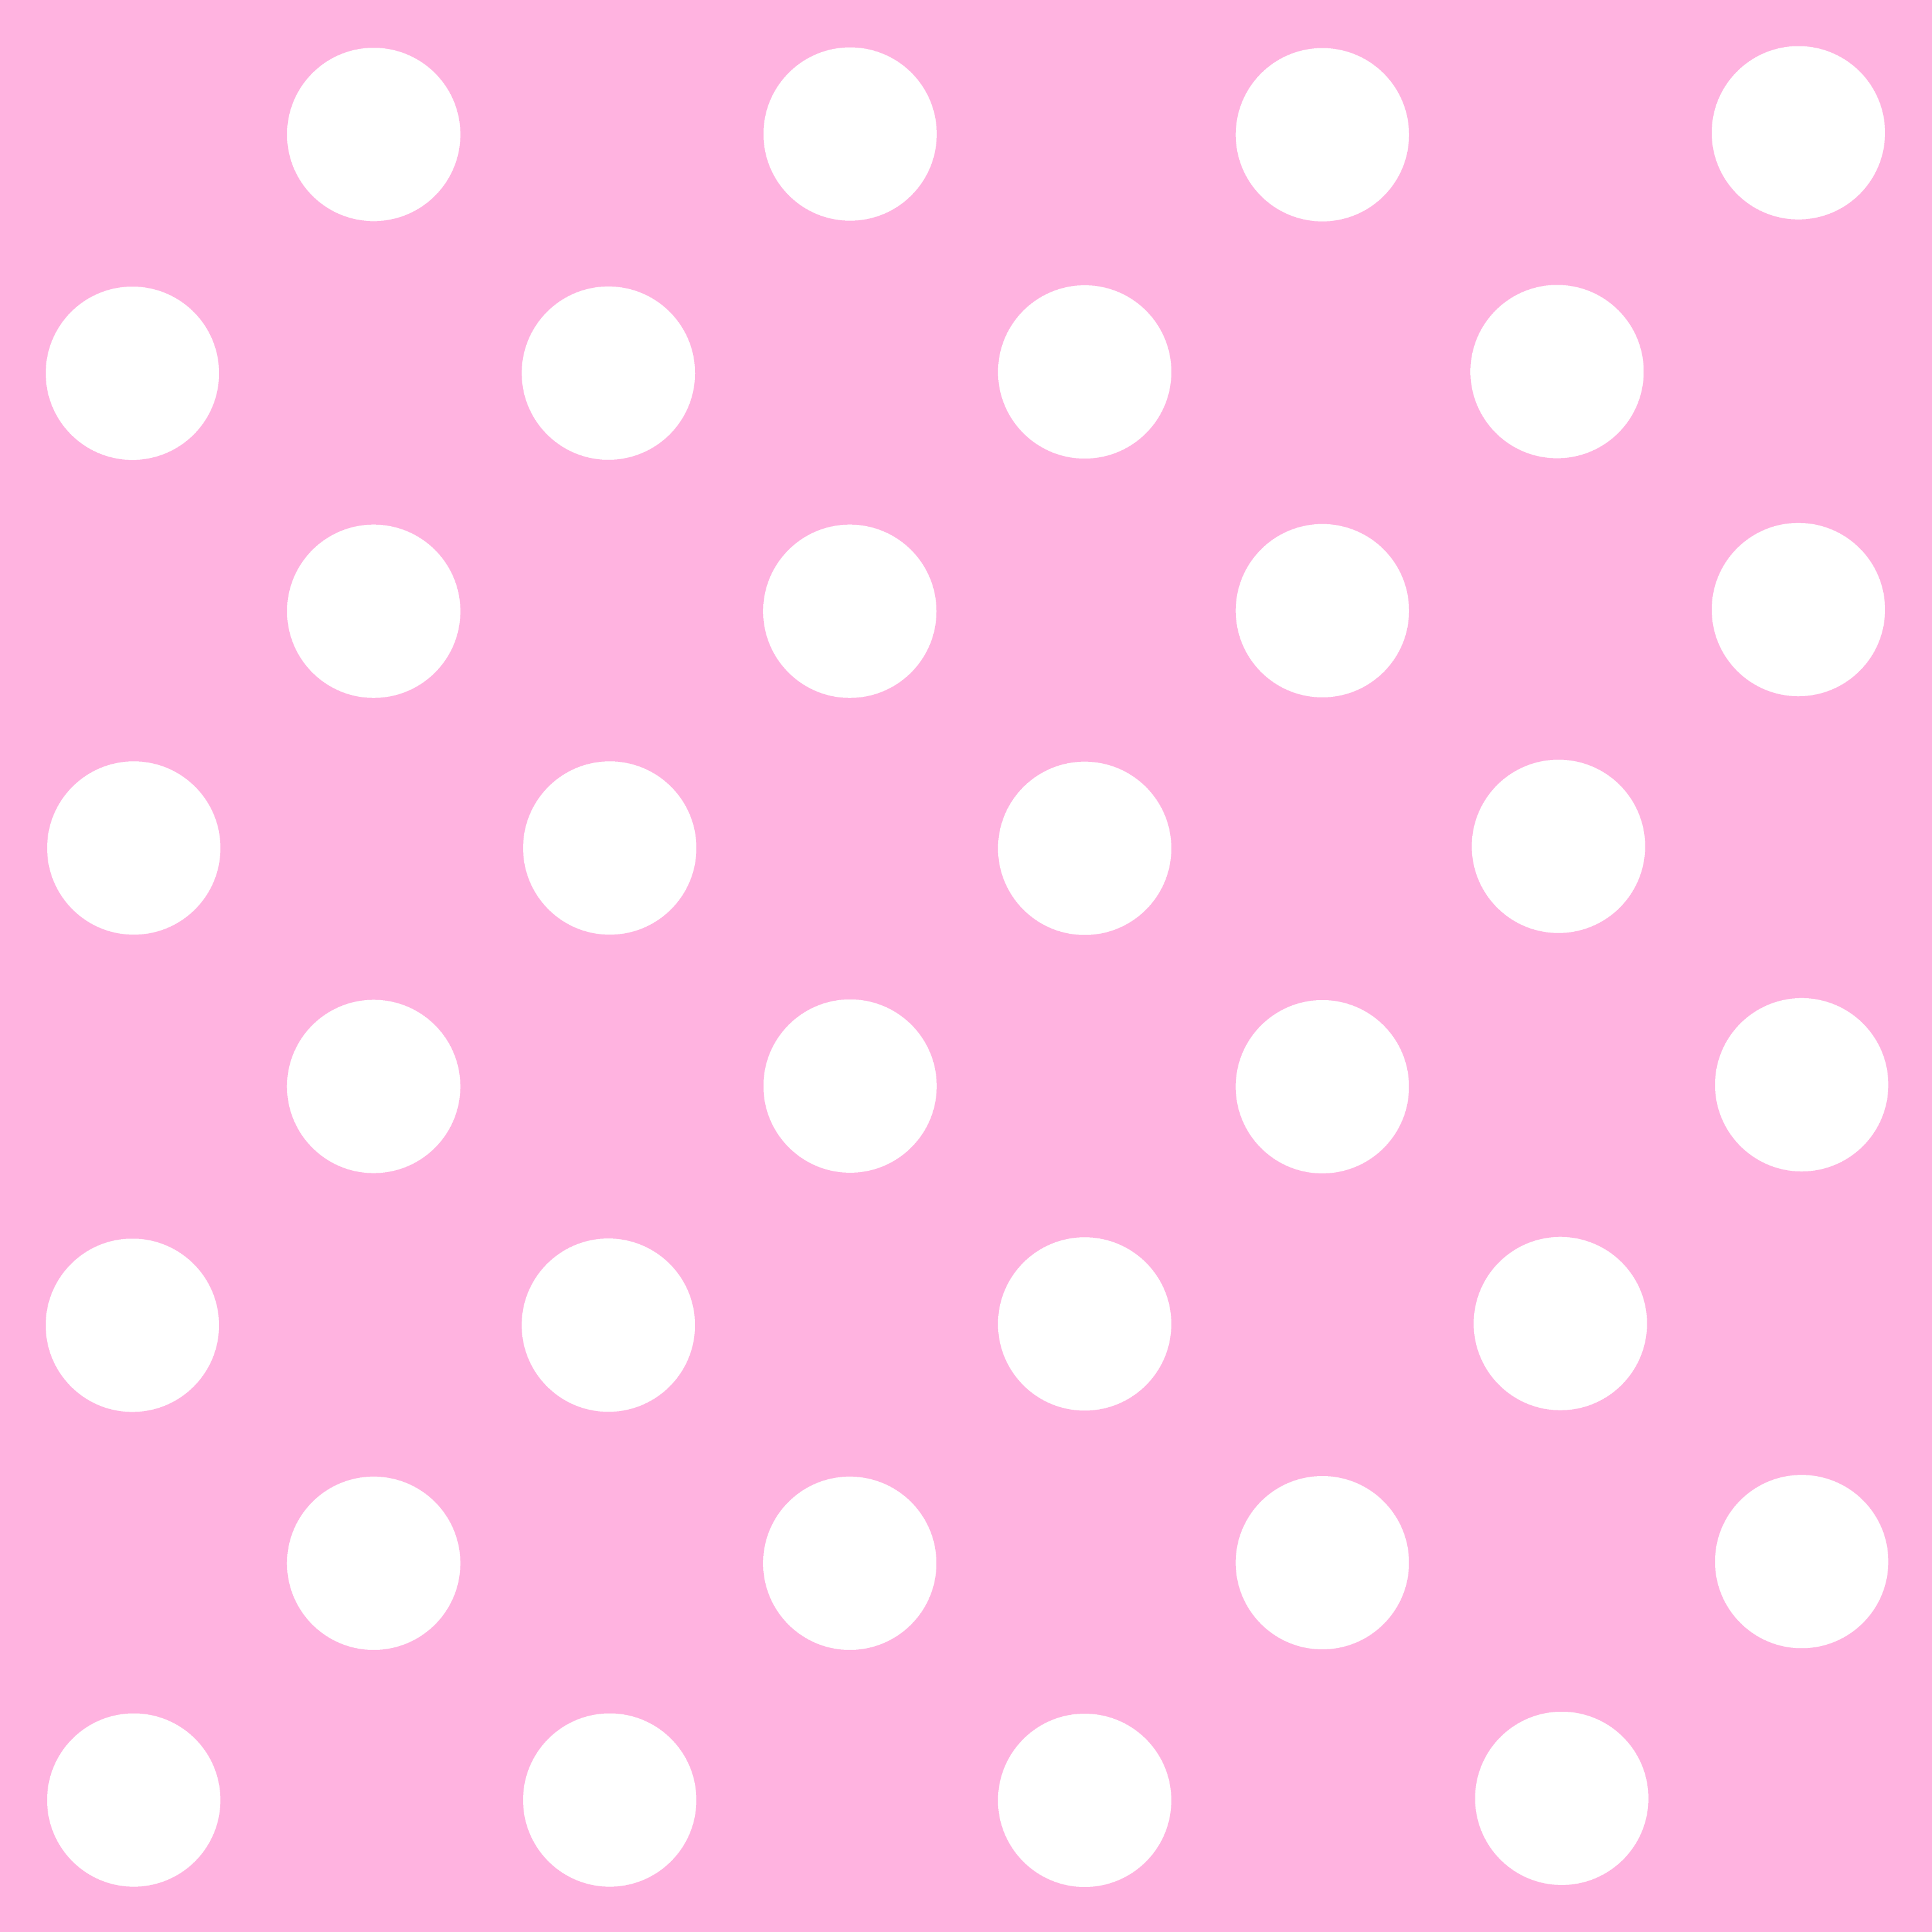 Pink And White Polka Dot Wallpaper Clipart Free To Use Clip Art Images And Photos Finder